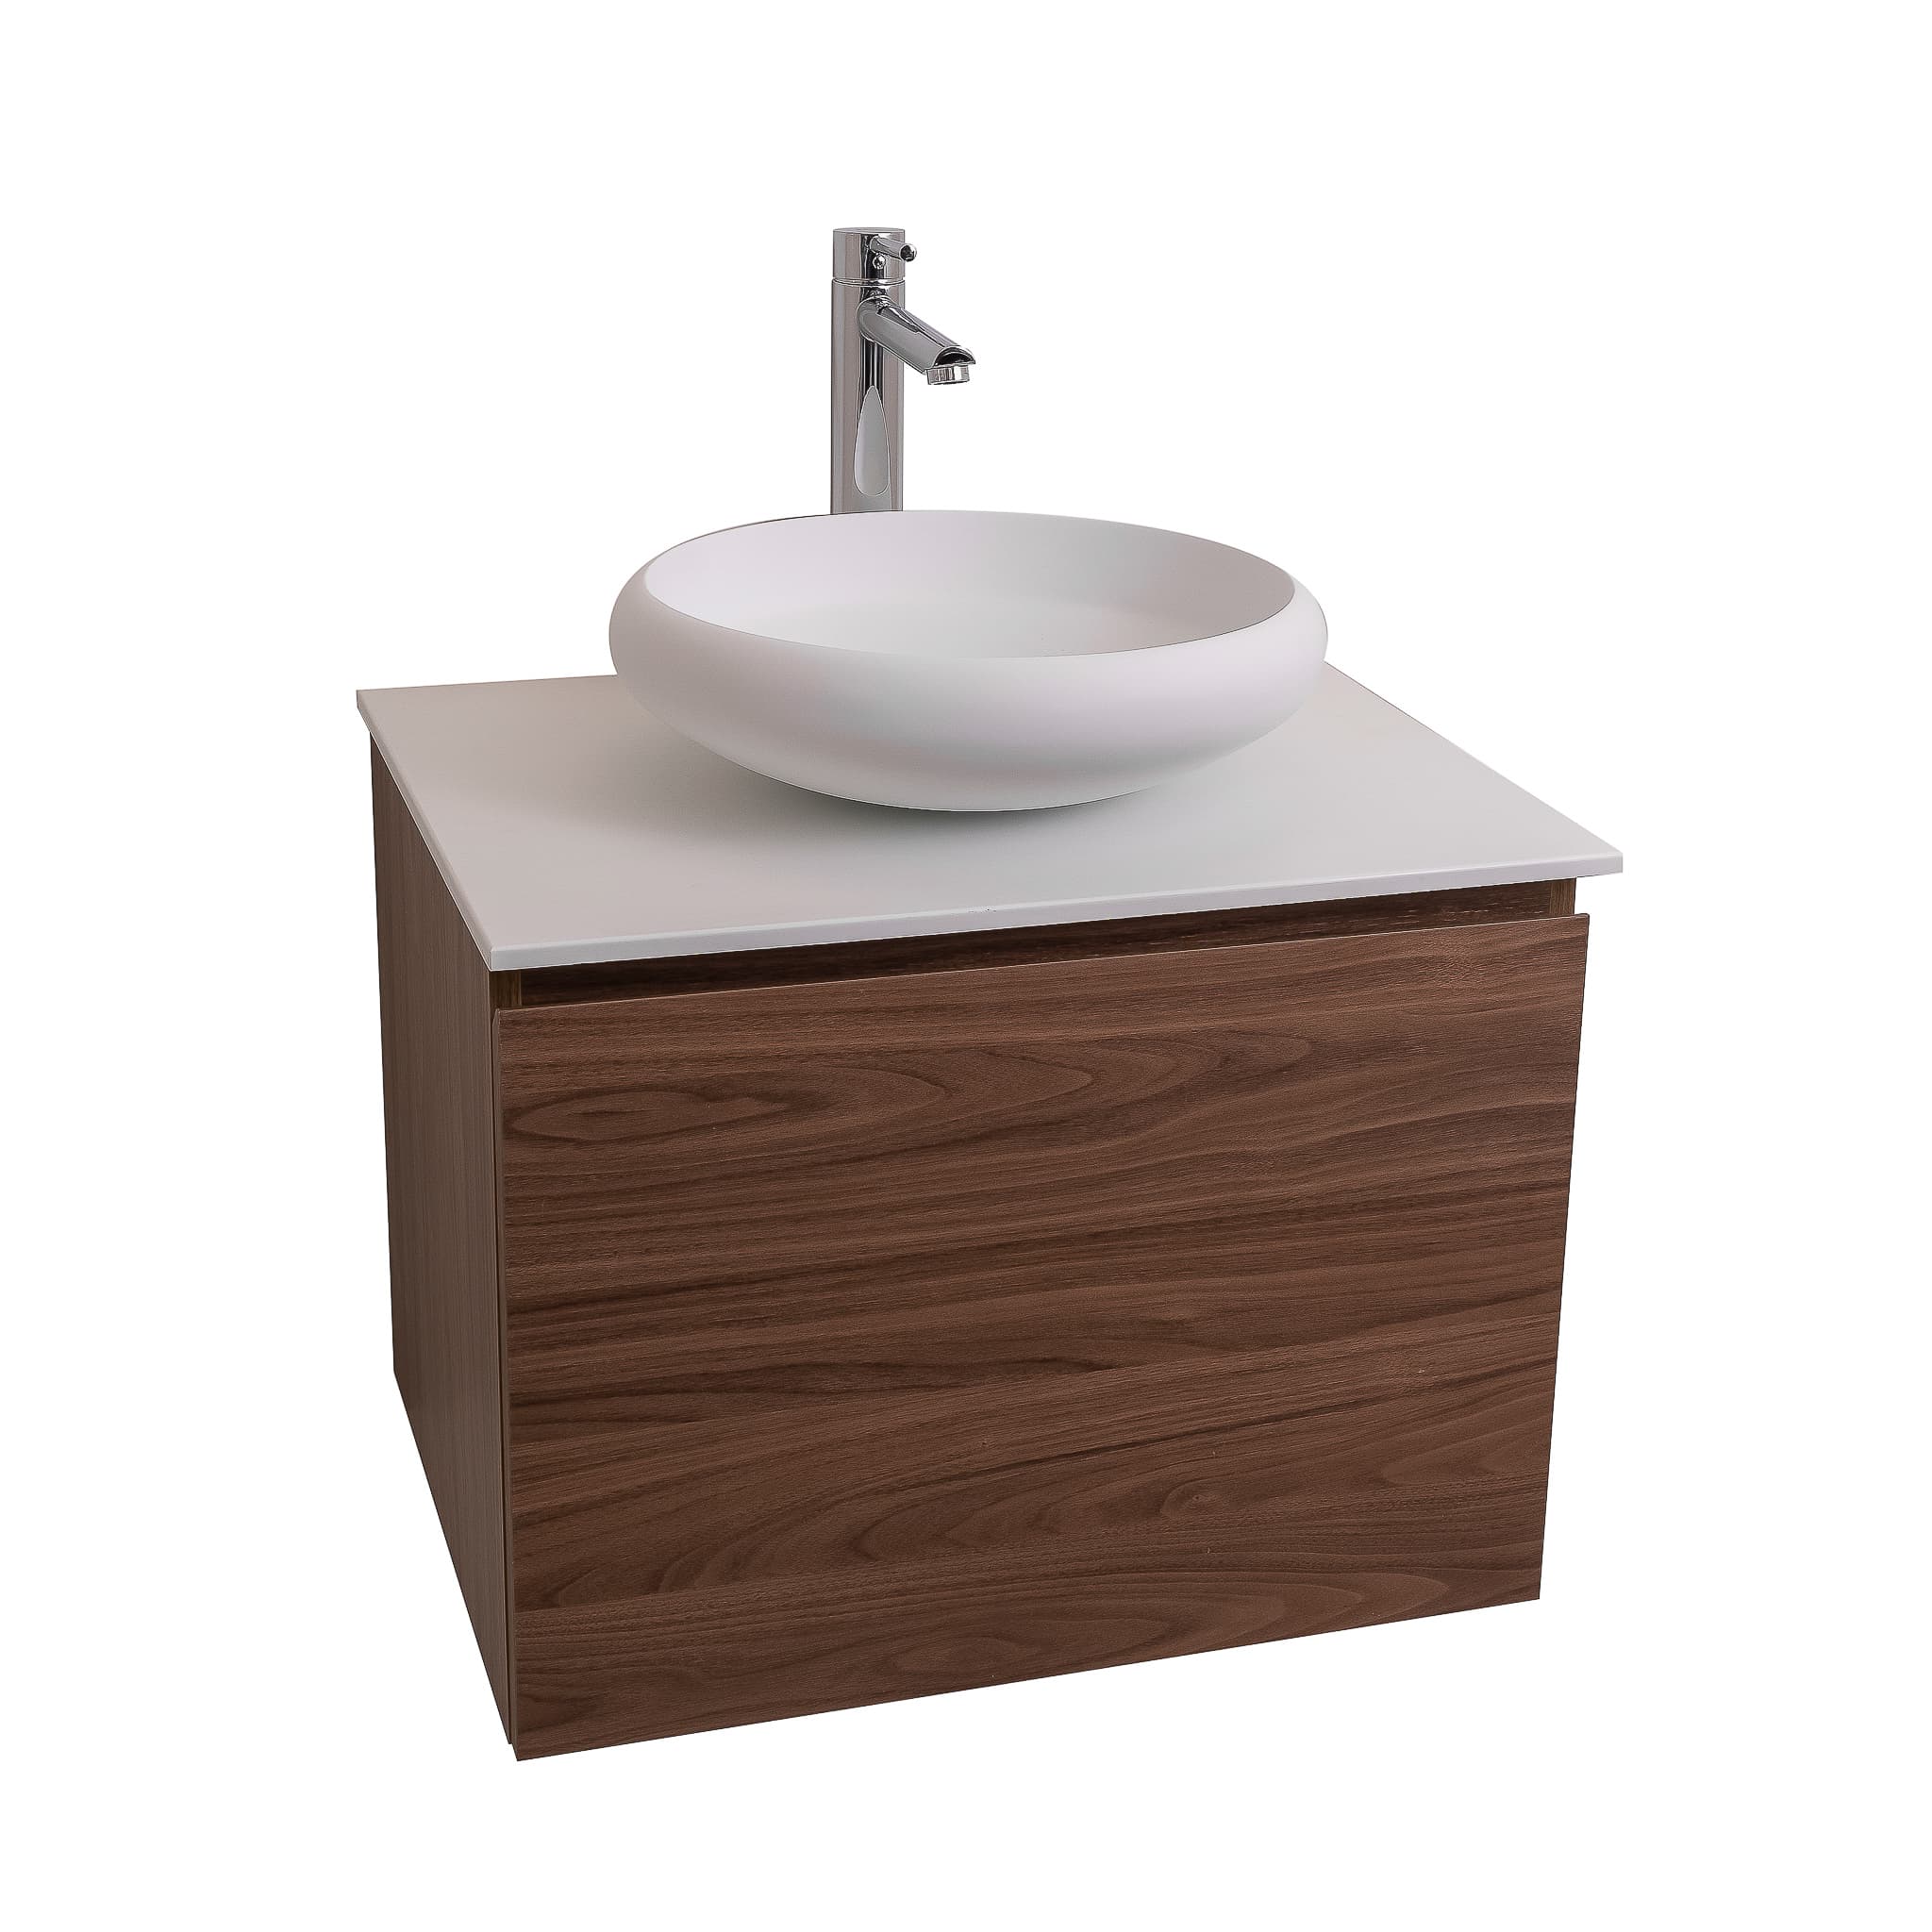 Venice 23.5 Walnut Wood Texture Cabinet, Solid Surface Flat White Counter And Round Solid Surface White Basin 1153, Wall Mounted Modern Vanity Set